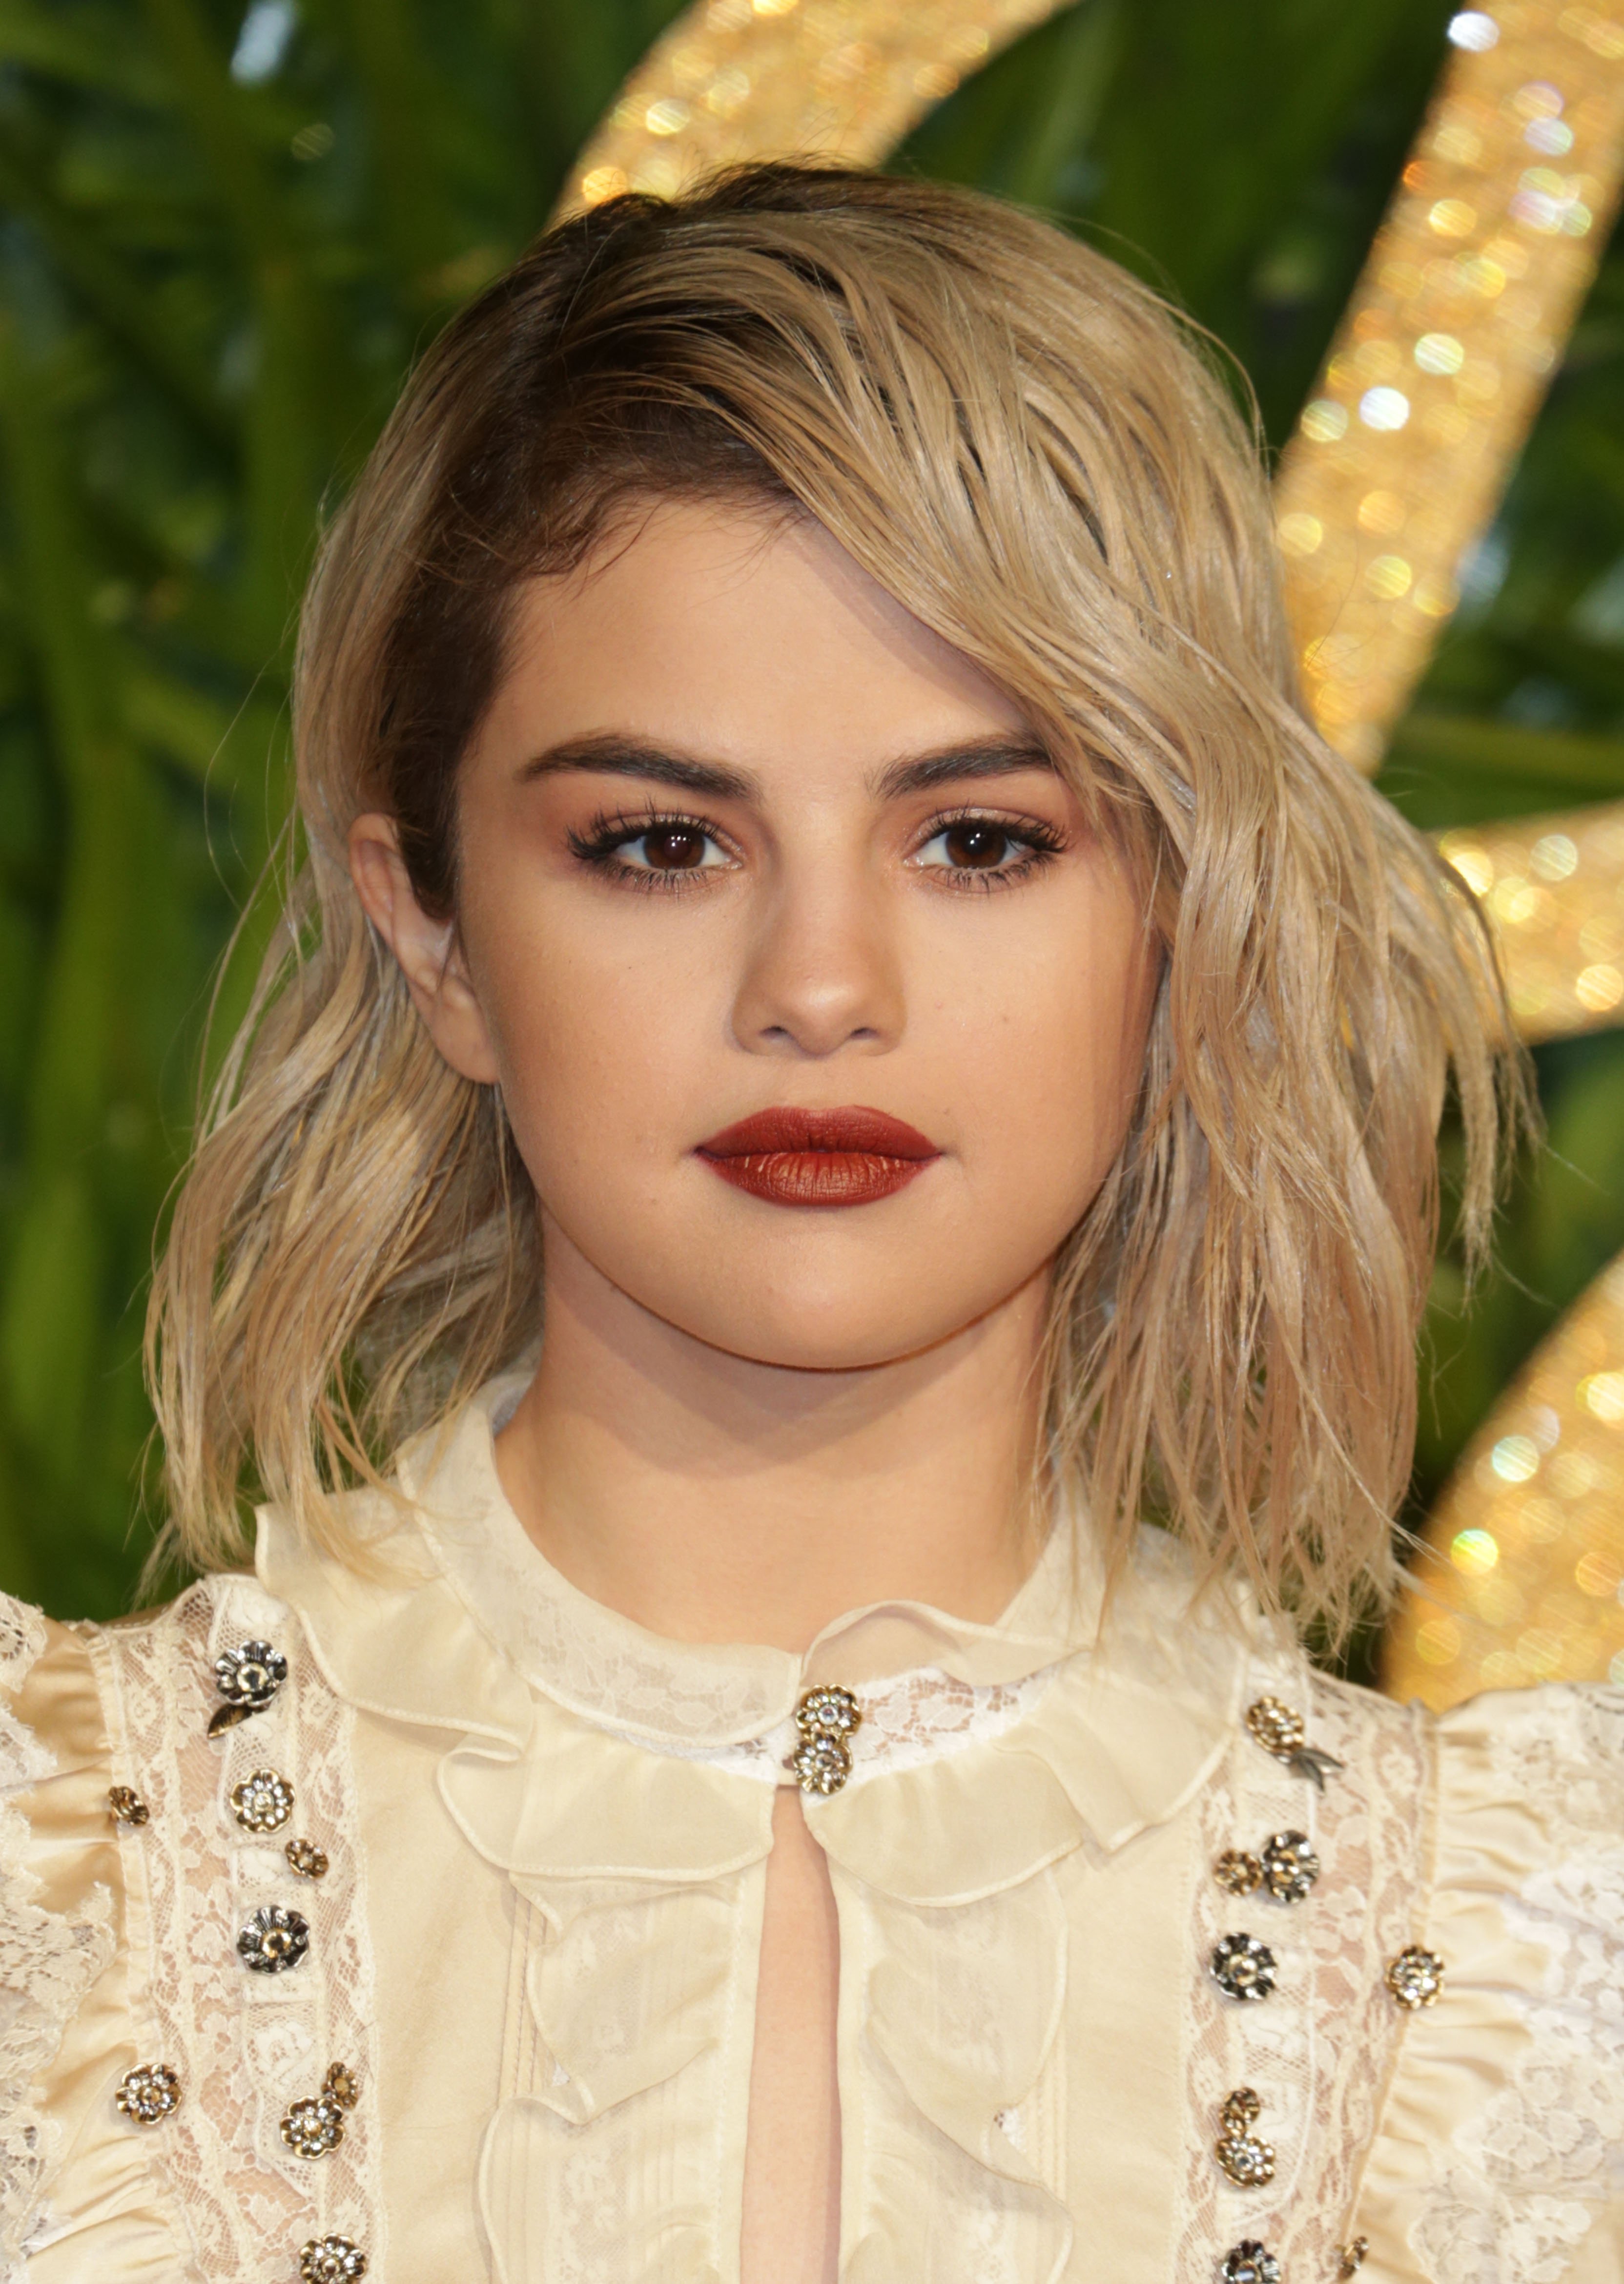 Selena Gomez attends The British Fashion Awards at The Royal Albert Hall on December 4, 2017 in London, United Kingdom | Photo: Shutterstock